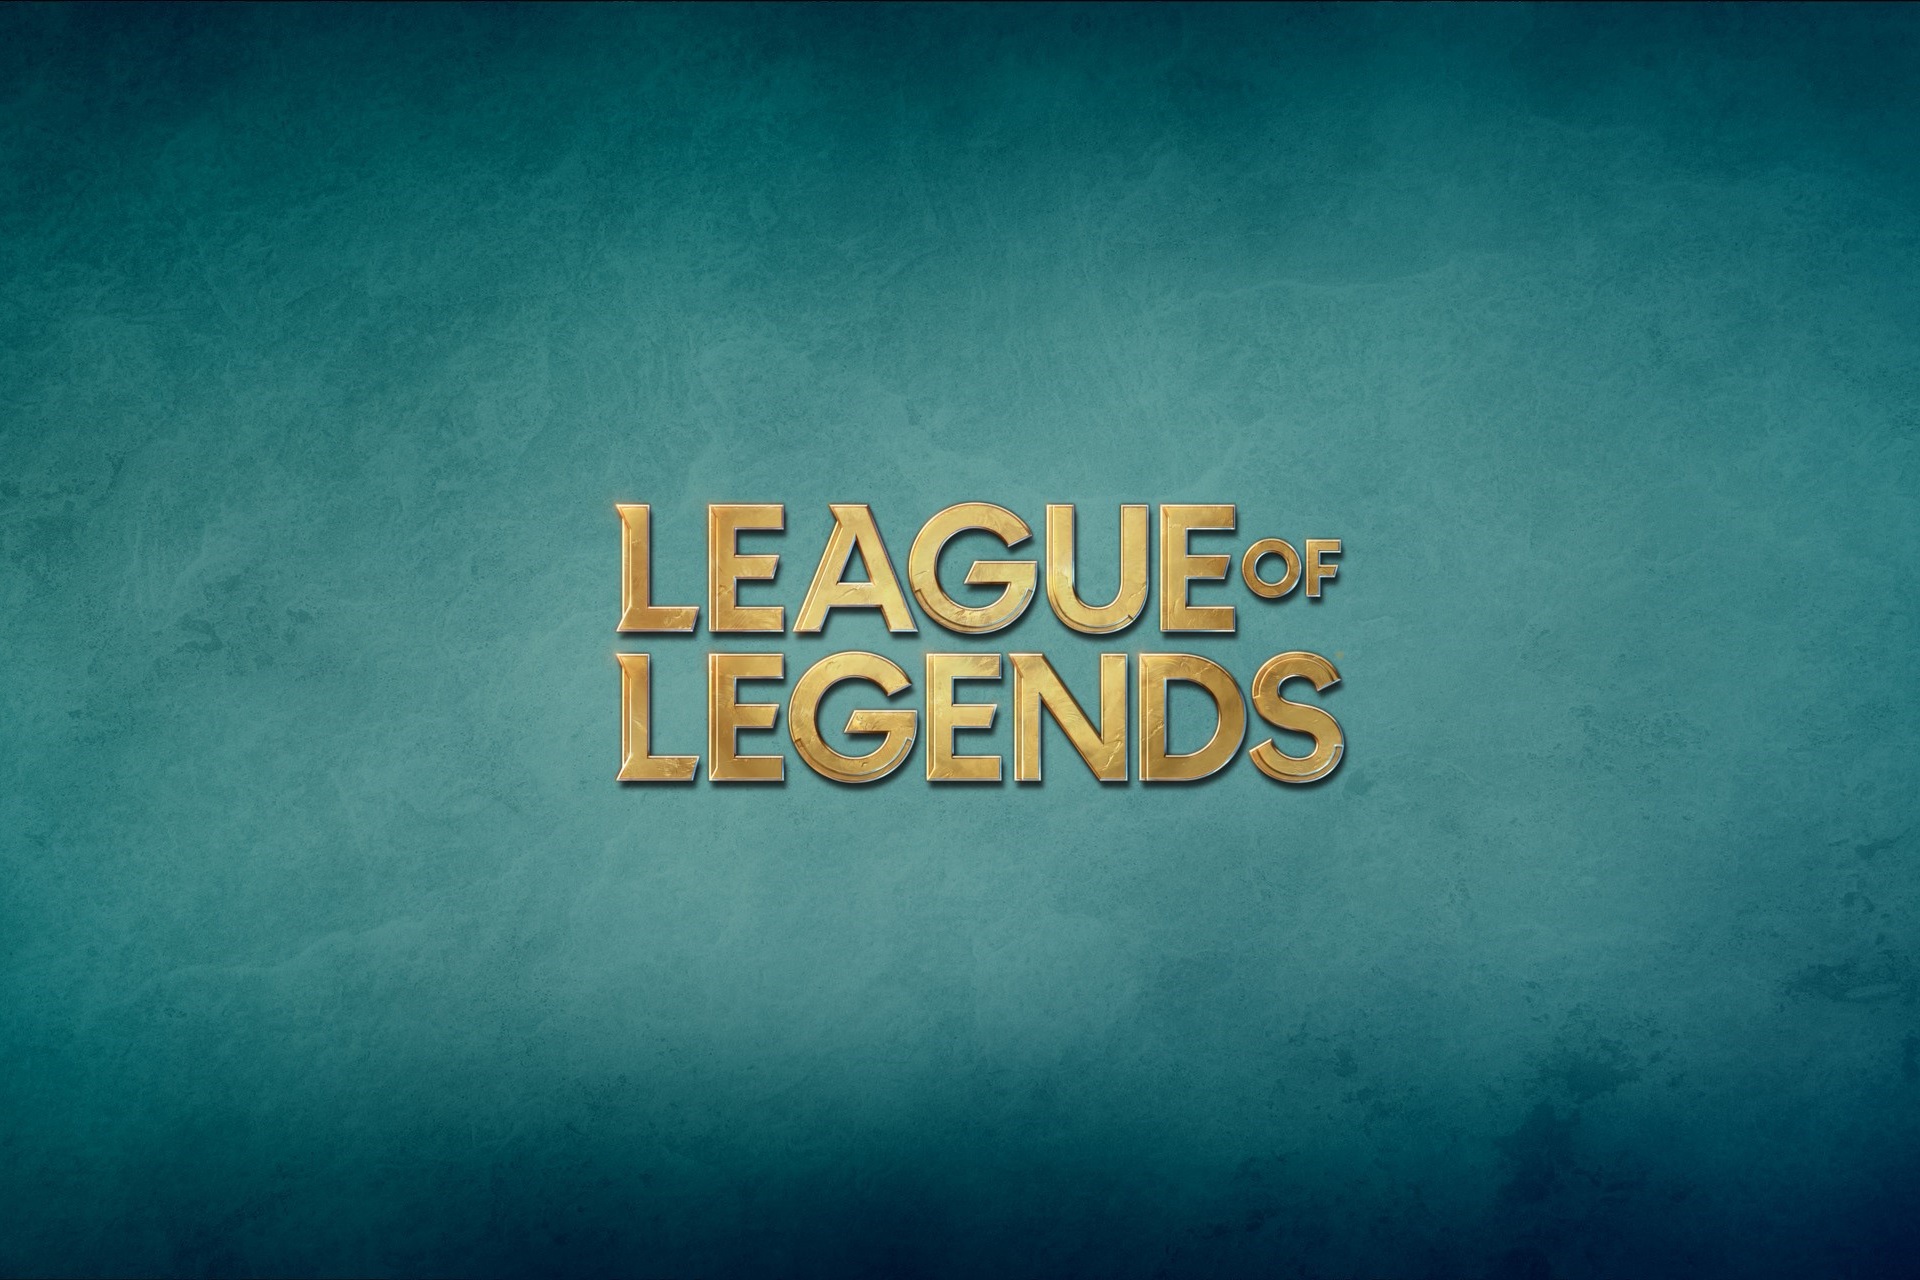 League of Legends doesn't launch [SOLVED]